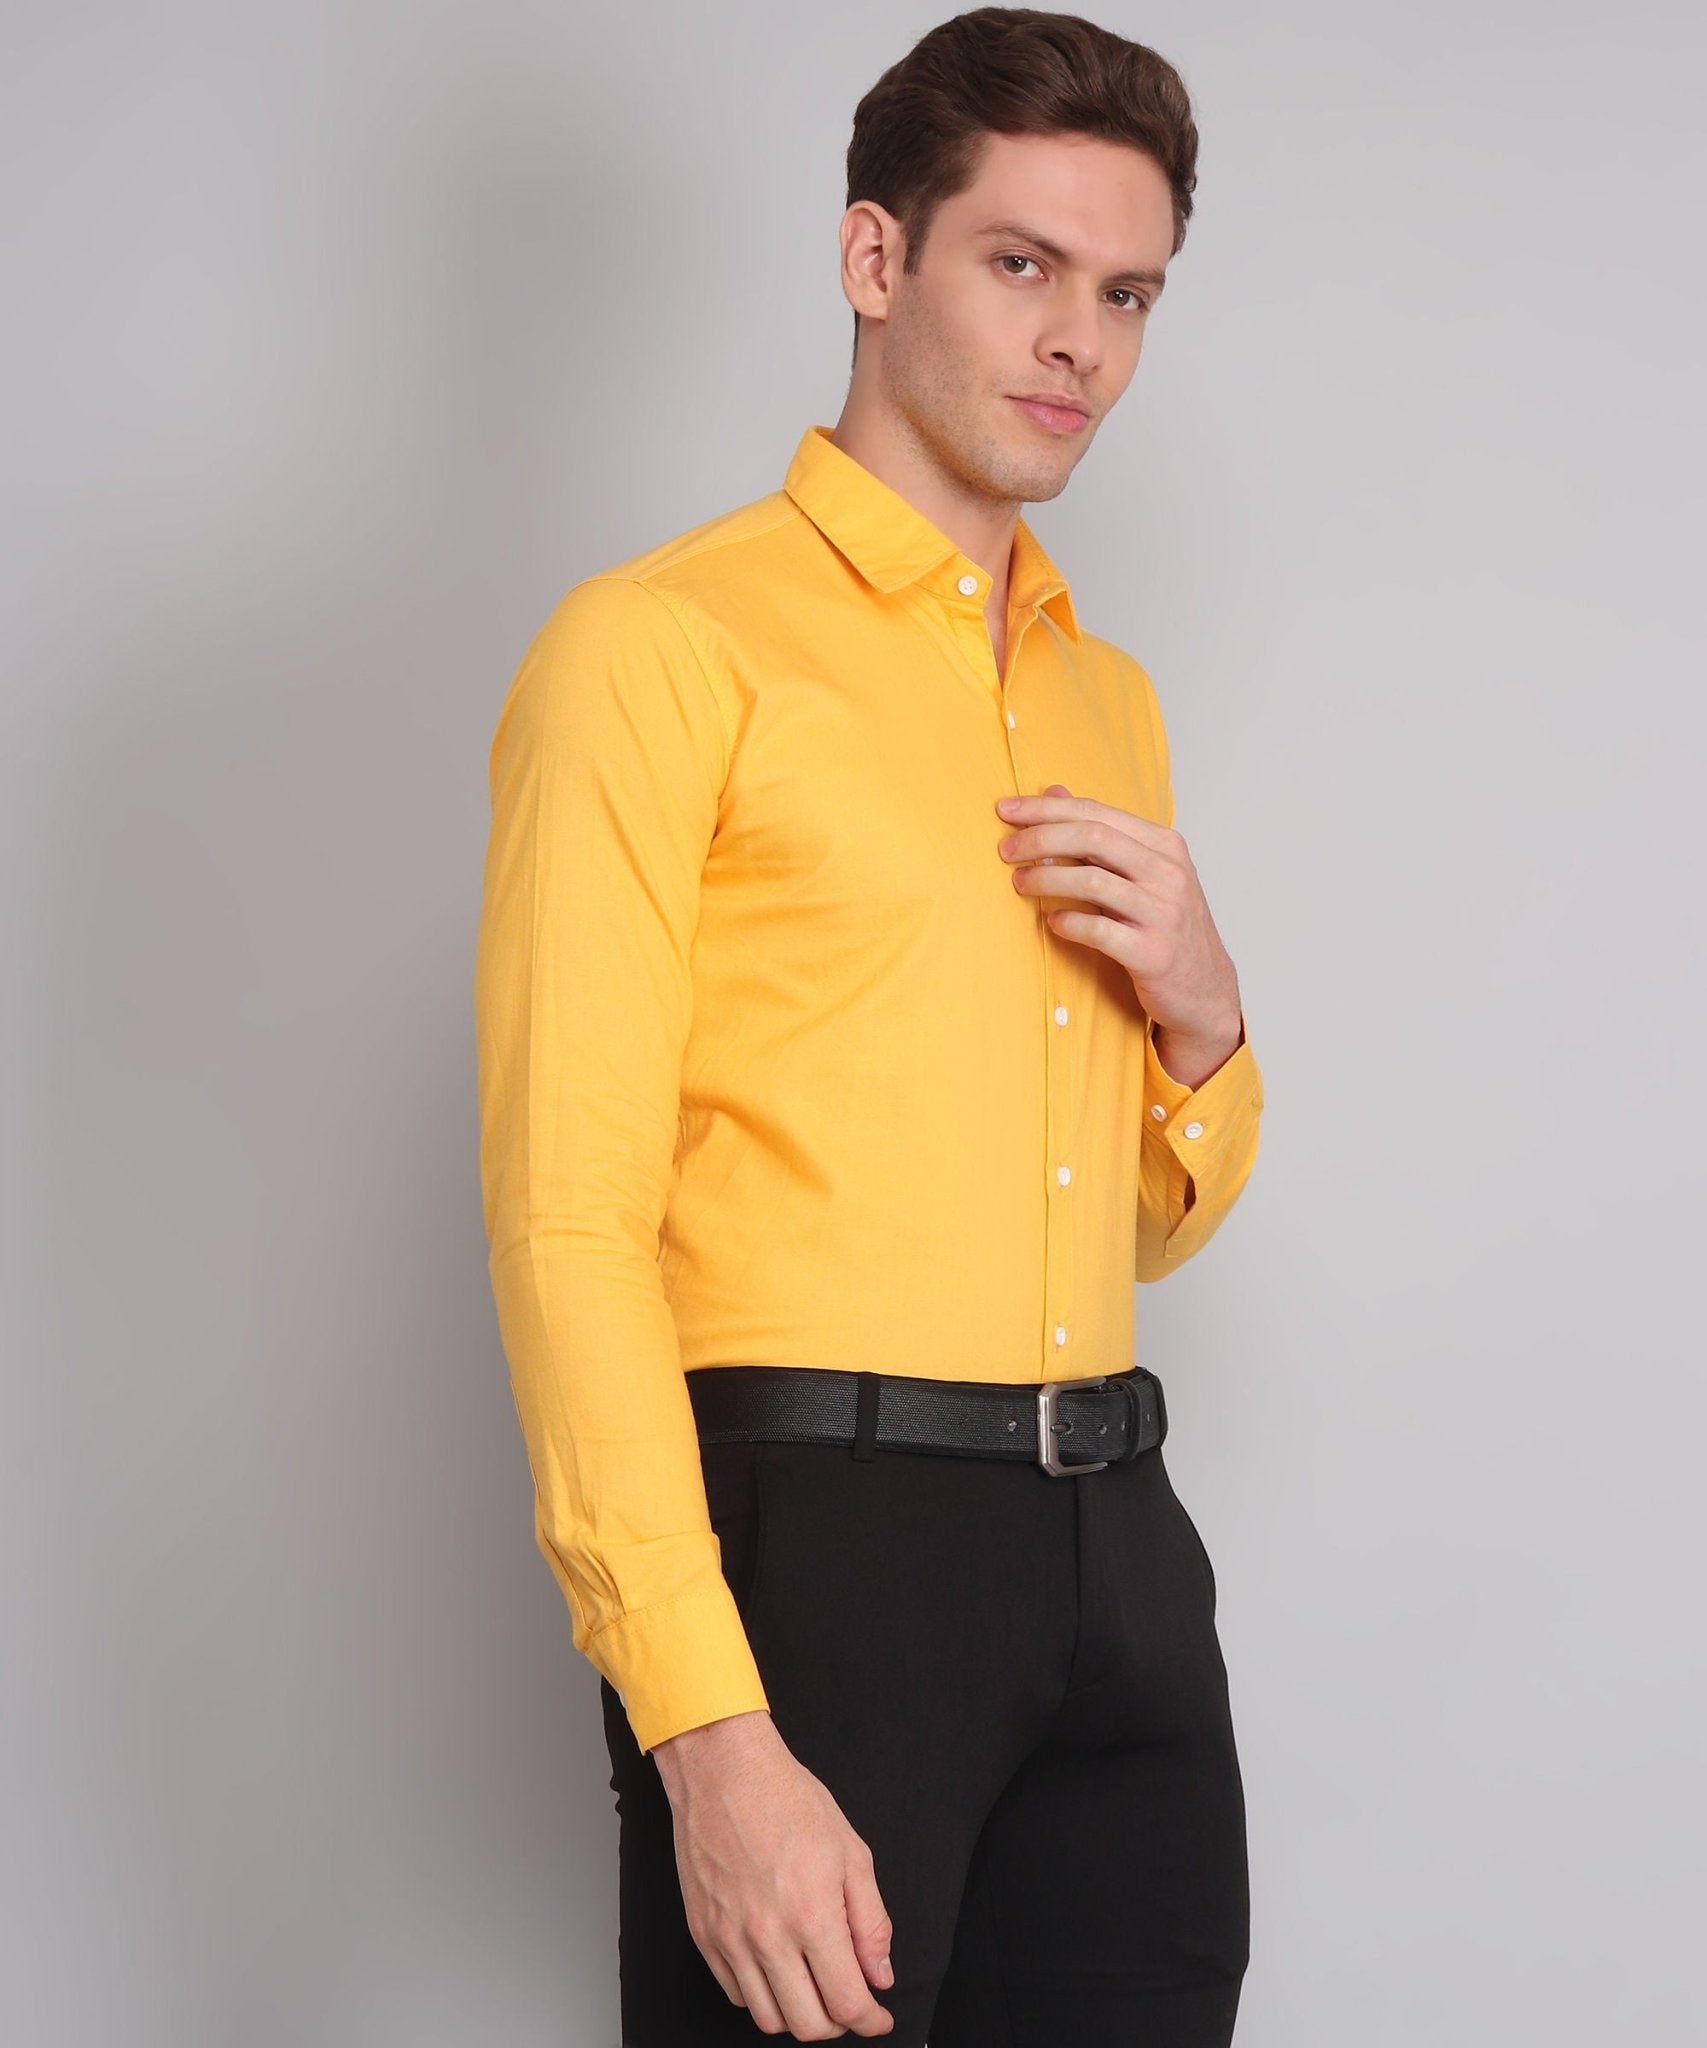 Luxurious Exclusive TryBuy Premium Wrinkle-Free Yellow Casual/Formal Shirt for Men - TryBuy® USA🇺🇸